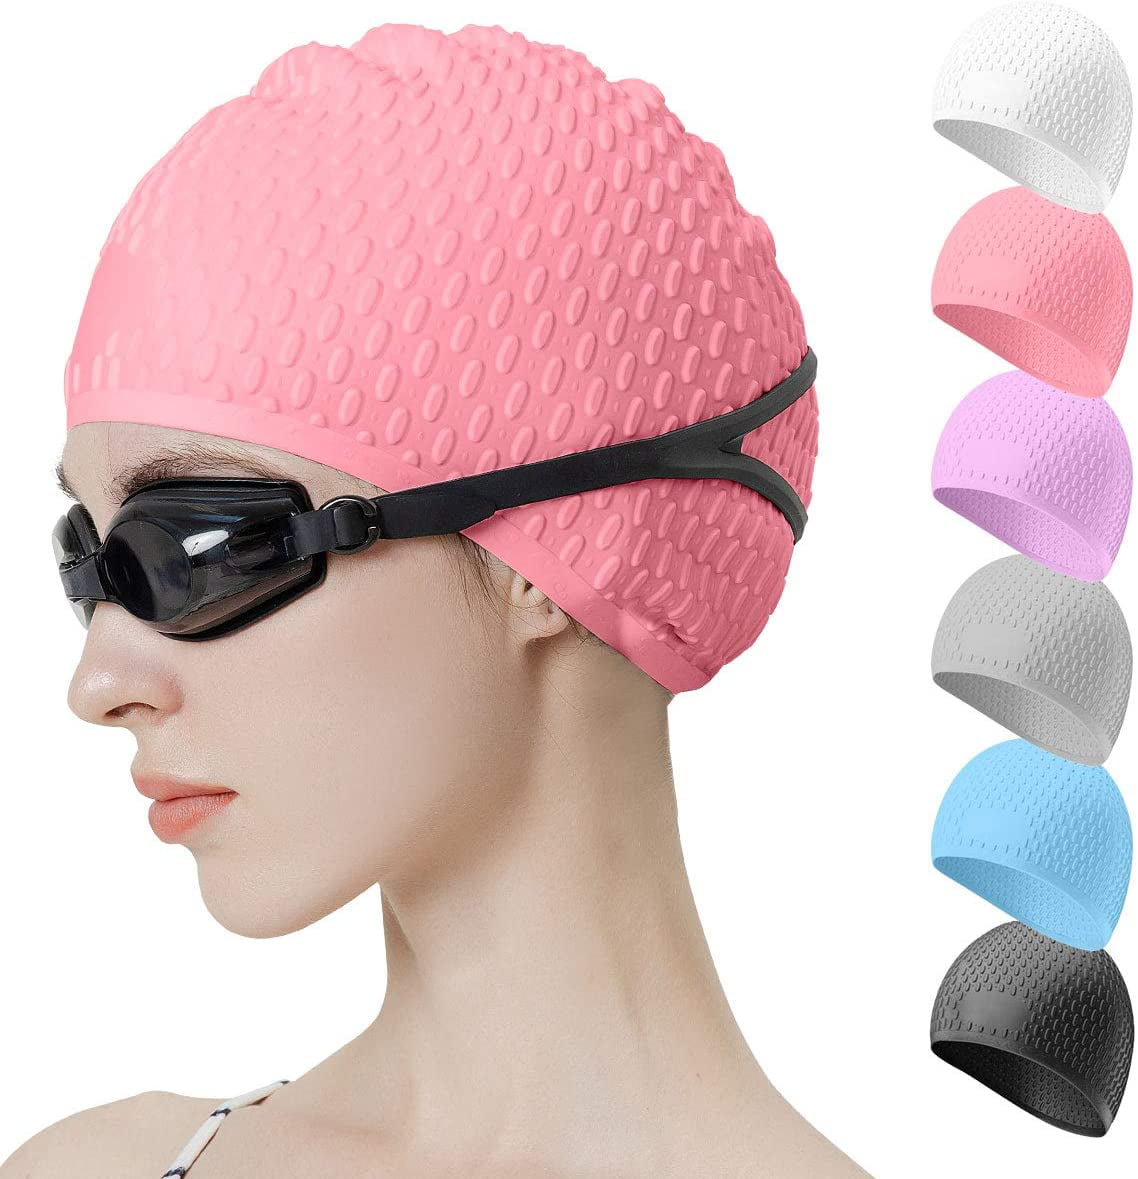 Tripsky Silicone Swim Cap,Comfortable Bathing Cap Ideal for Curly Short Medium Long Hair Swimming Cap for Women and Men Shower Caps Keep Hairstyle Unchanged